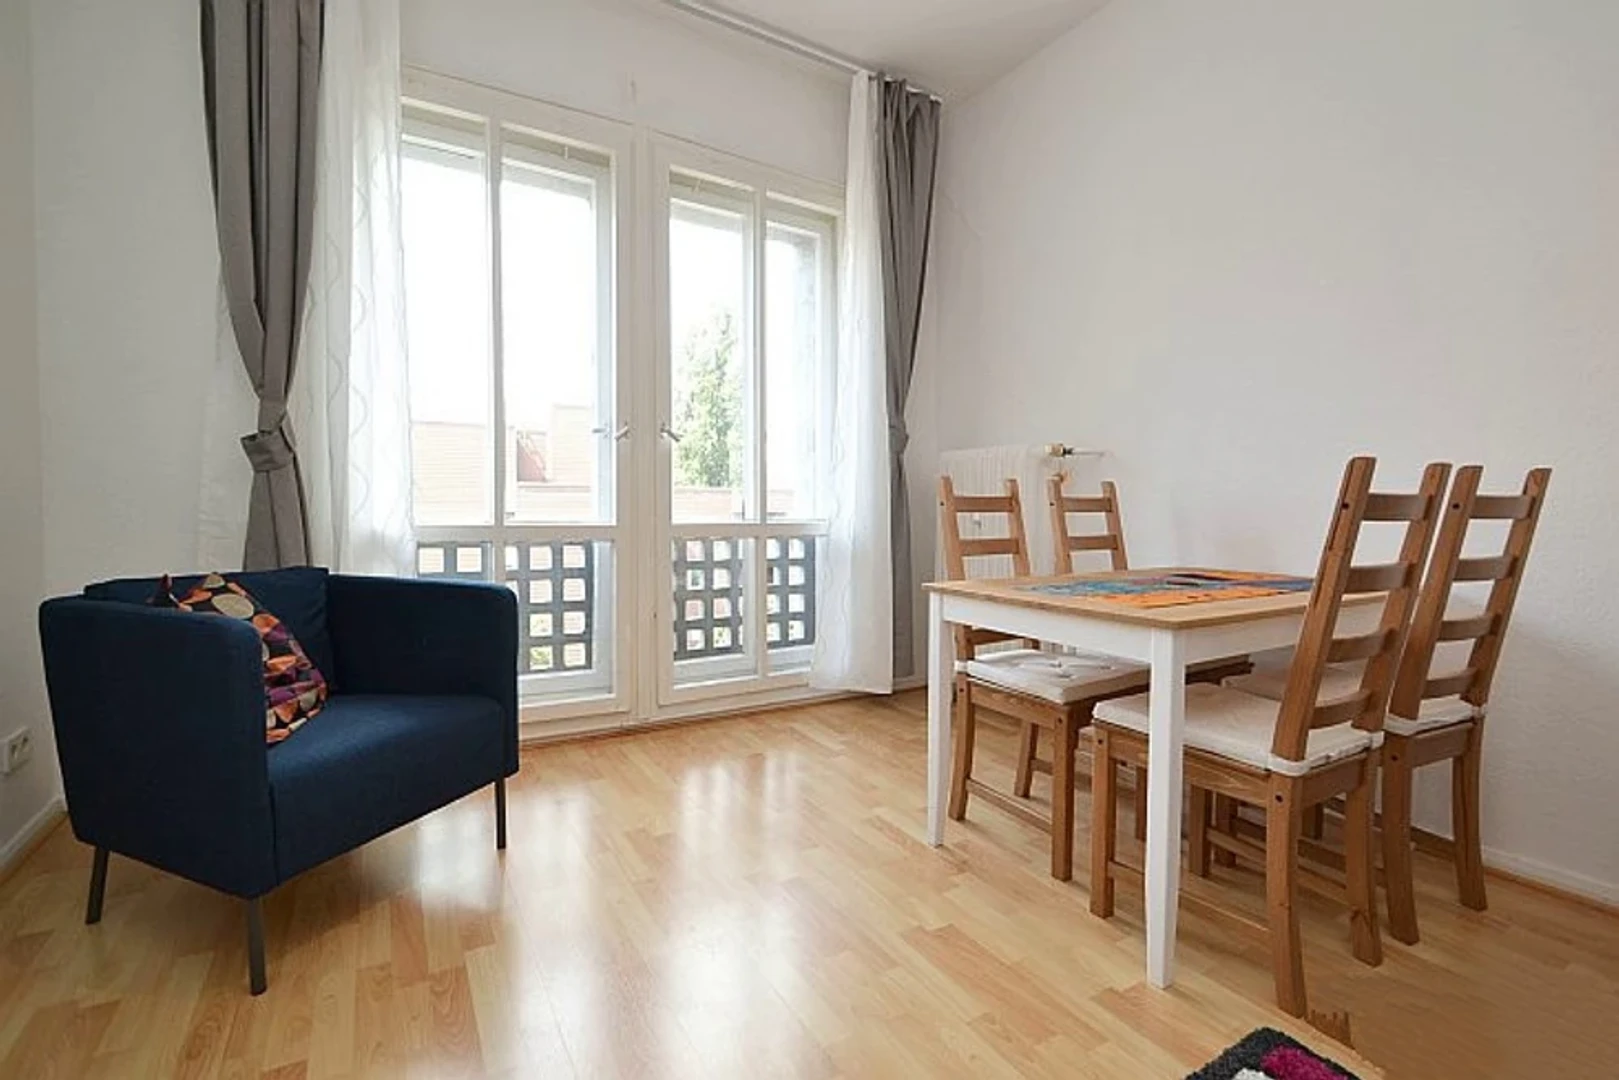 Accommodation with 3 bedrooms in Berlin